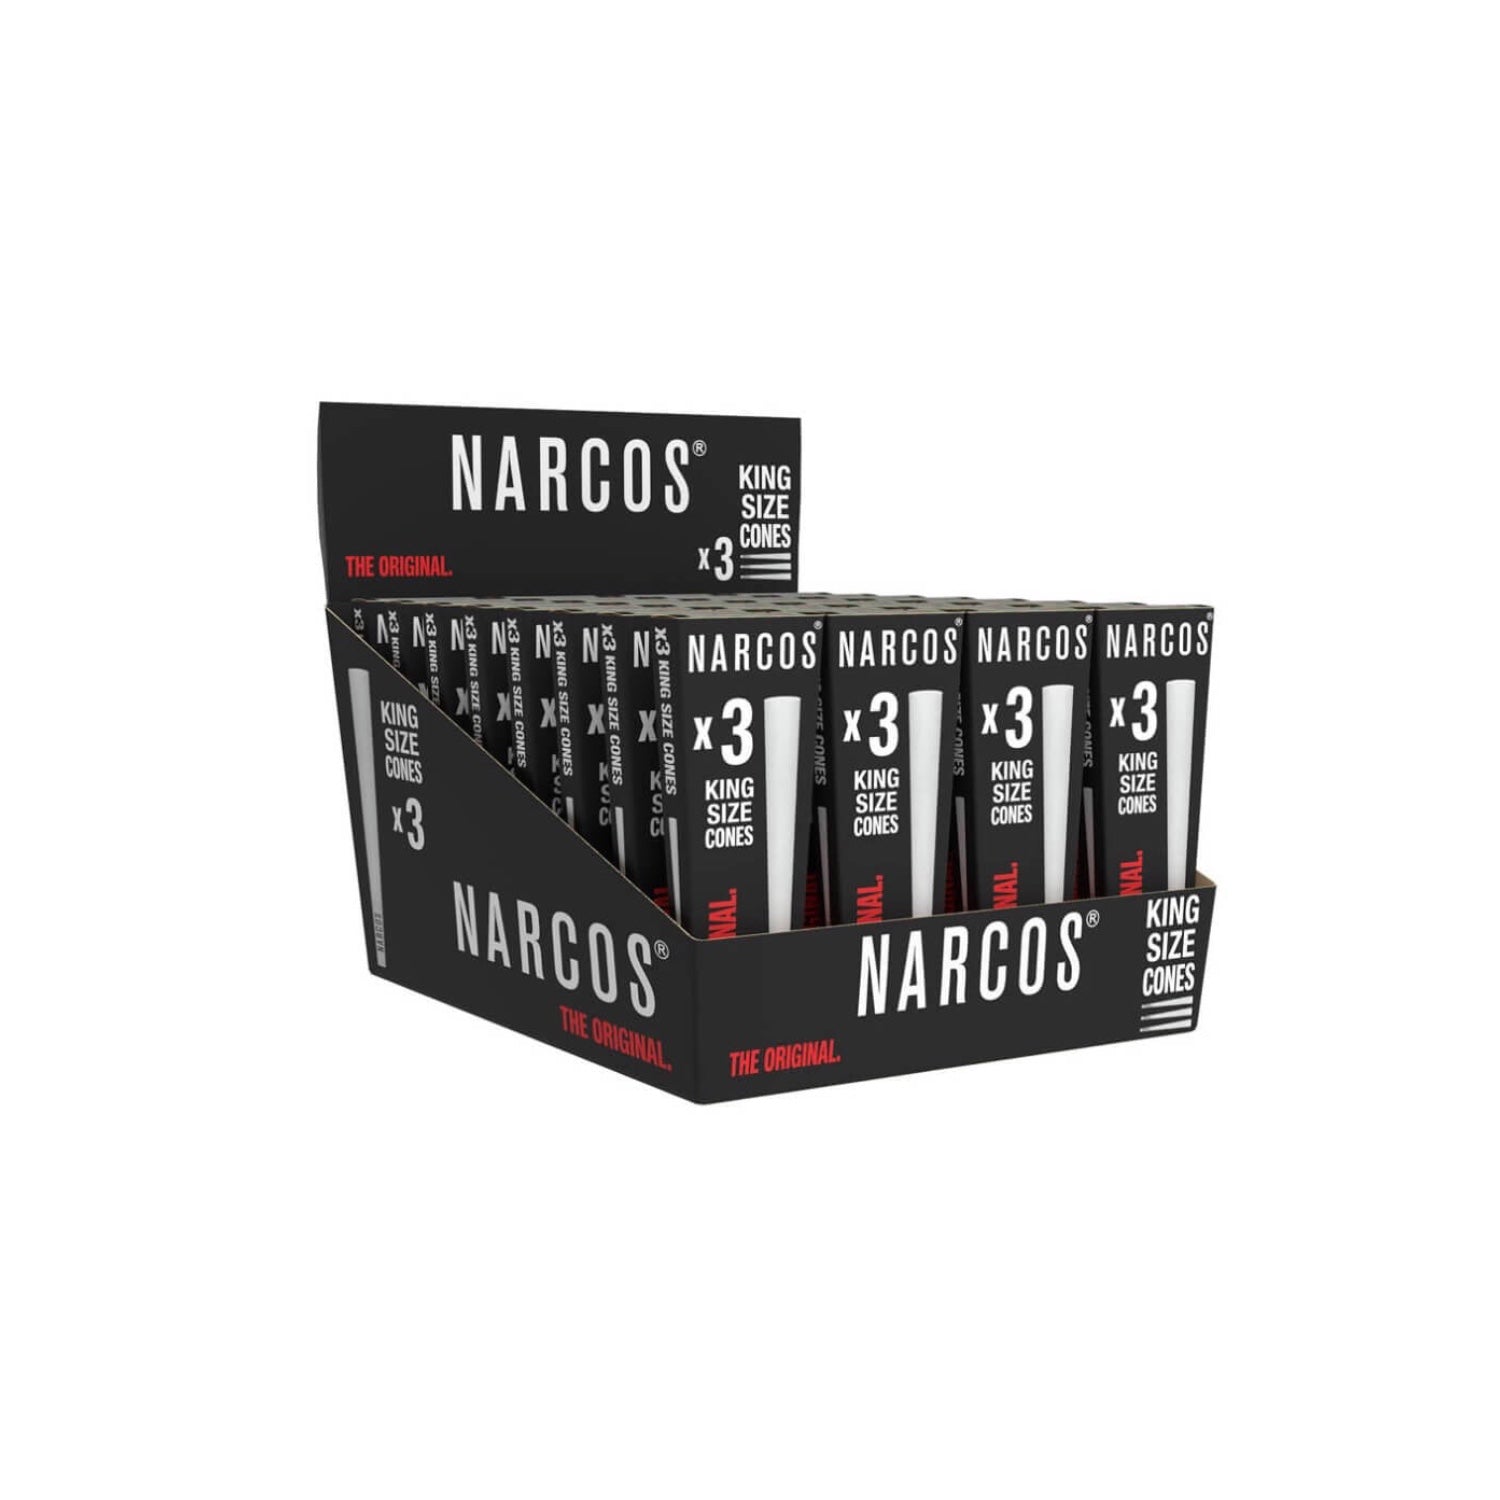 Narcos King Size Cones Display